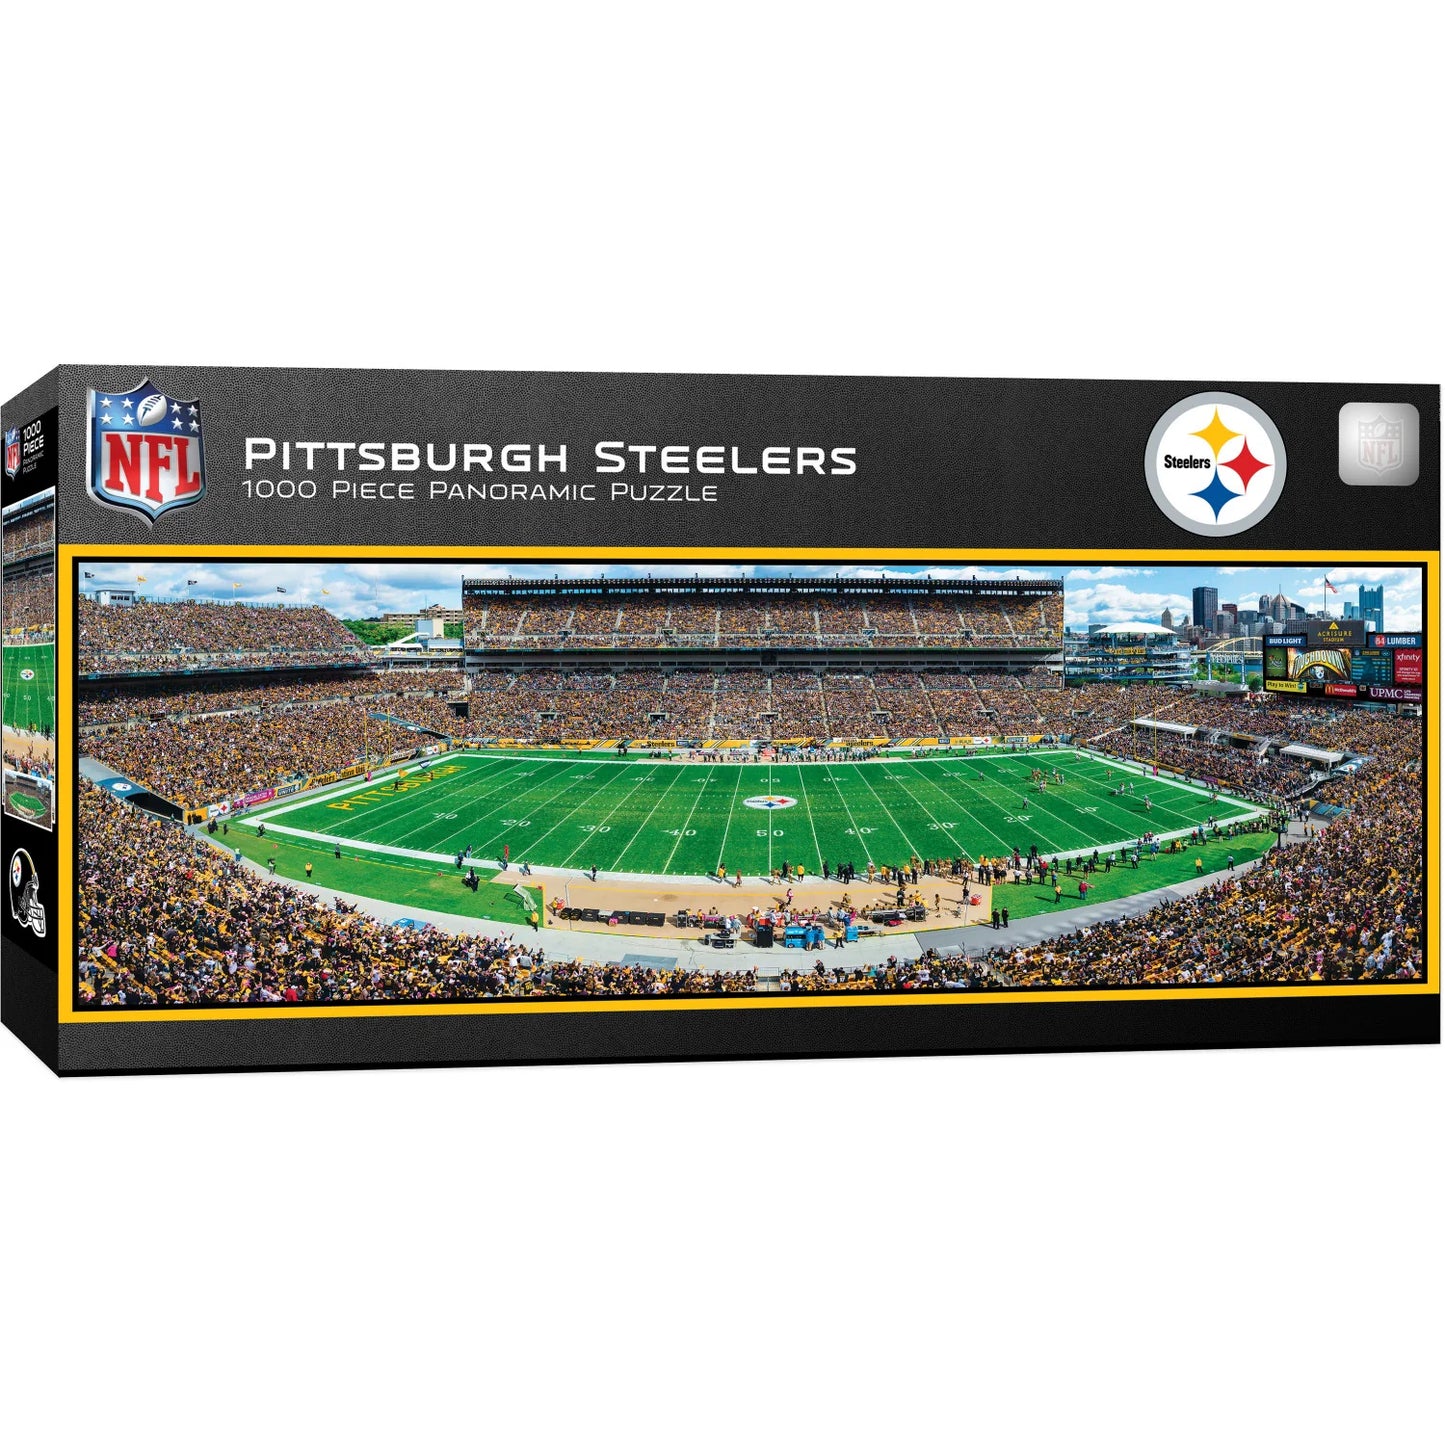 Pittsburgh Steelers Panoramic Stadium 1000 Piece Puzzle - Center View by Masterpieces